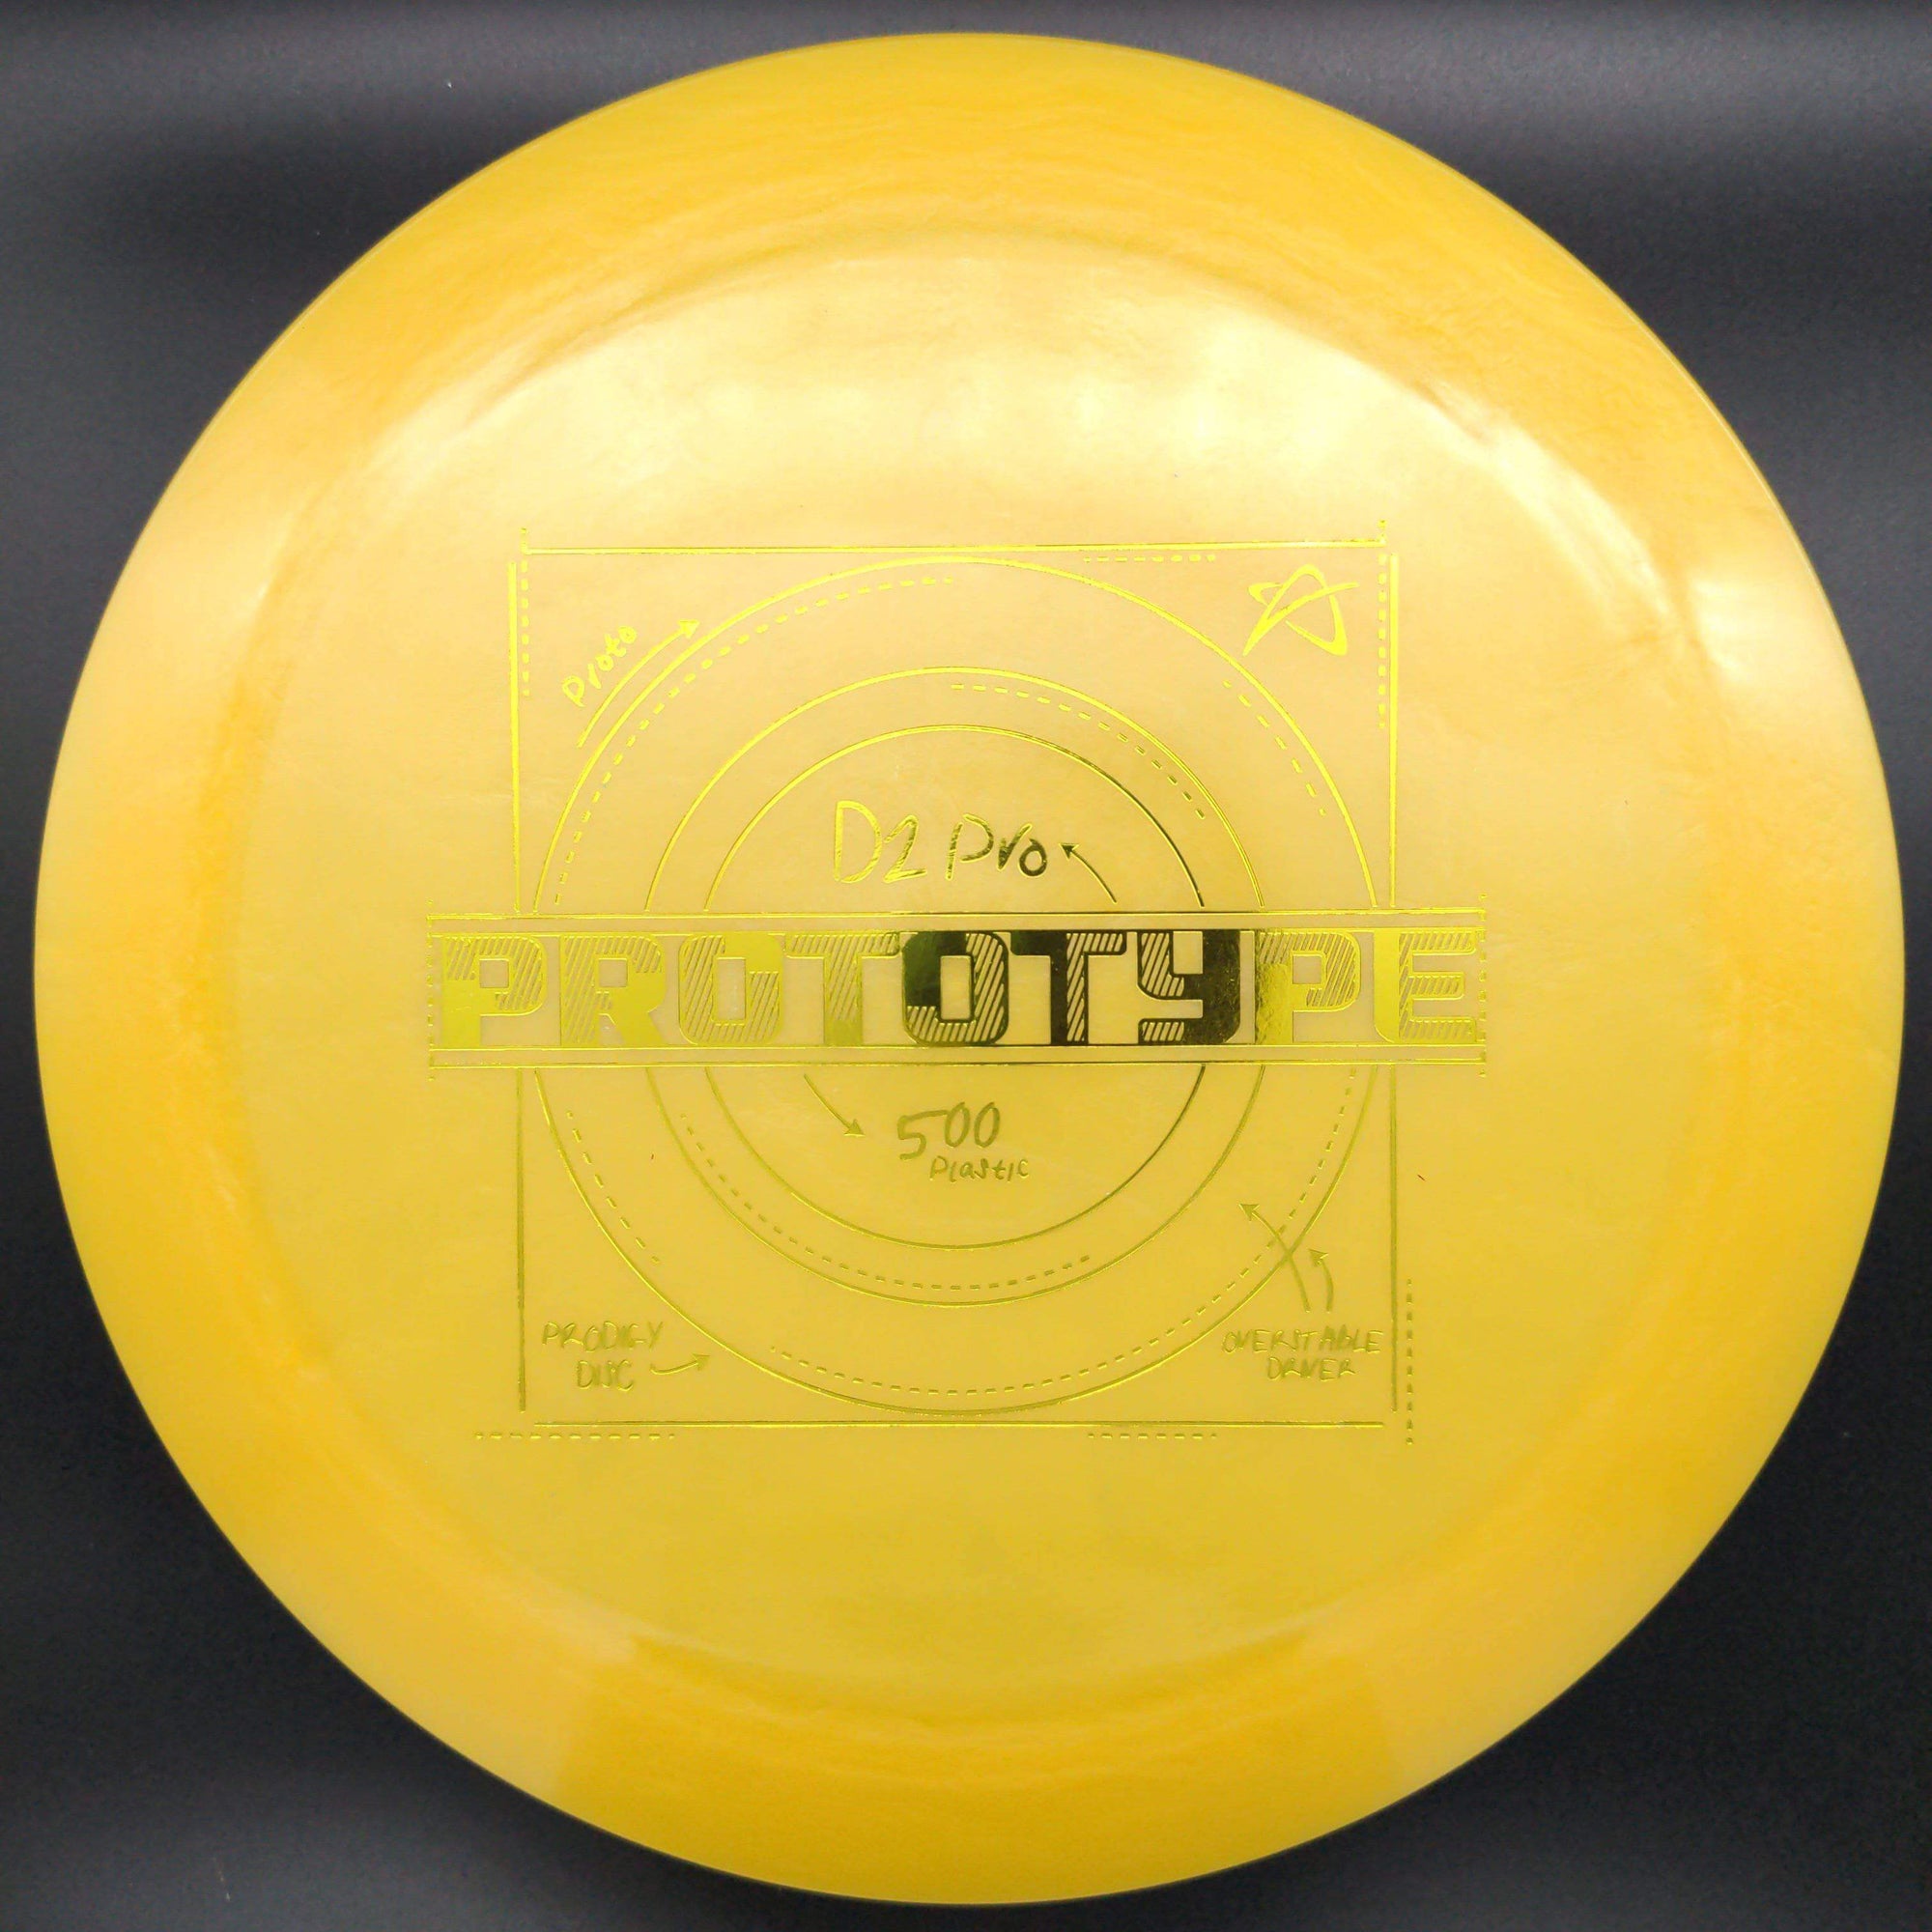 Prodigy Distance Driver Yellow Yellow Stamp 174g D2 Pro, 500, Prototype